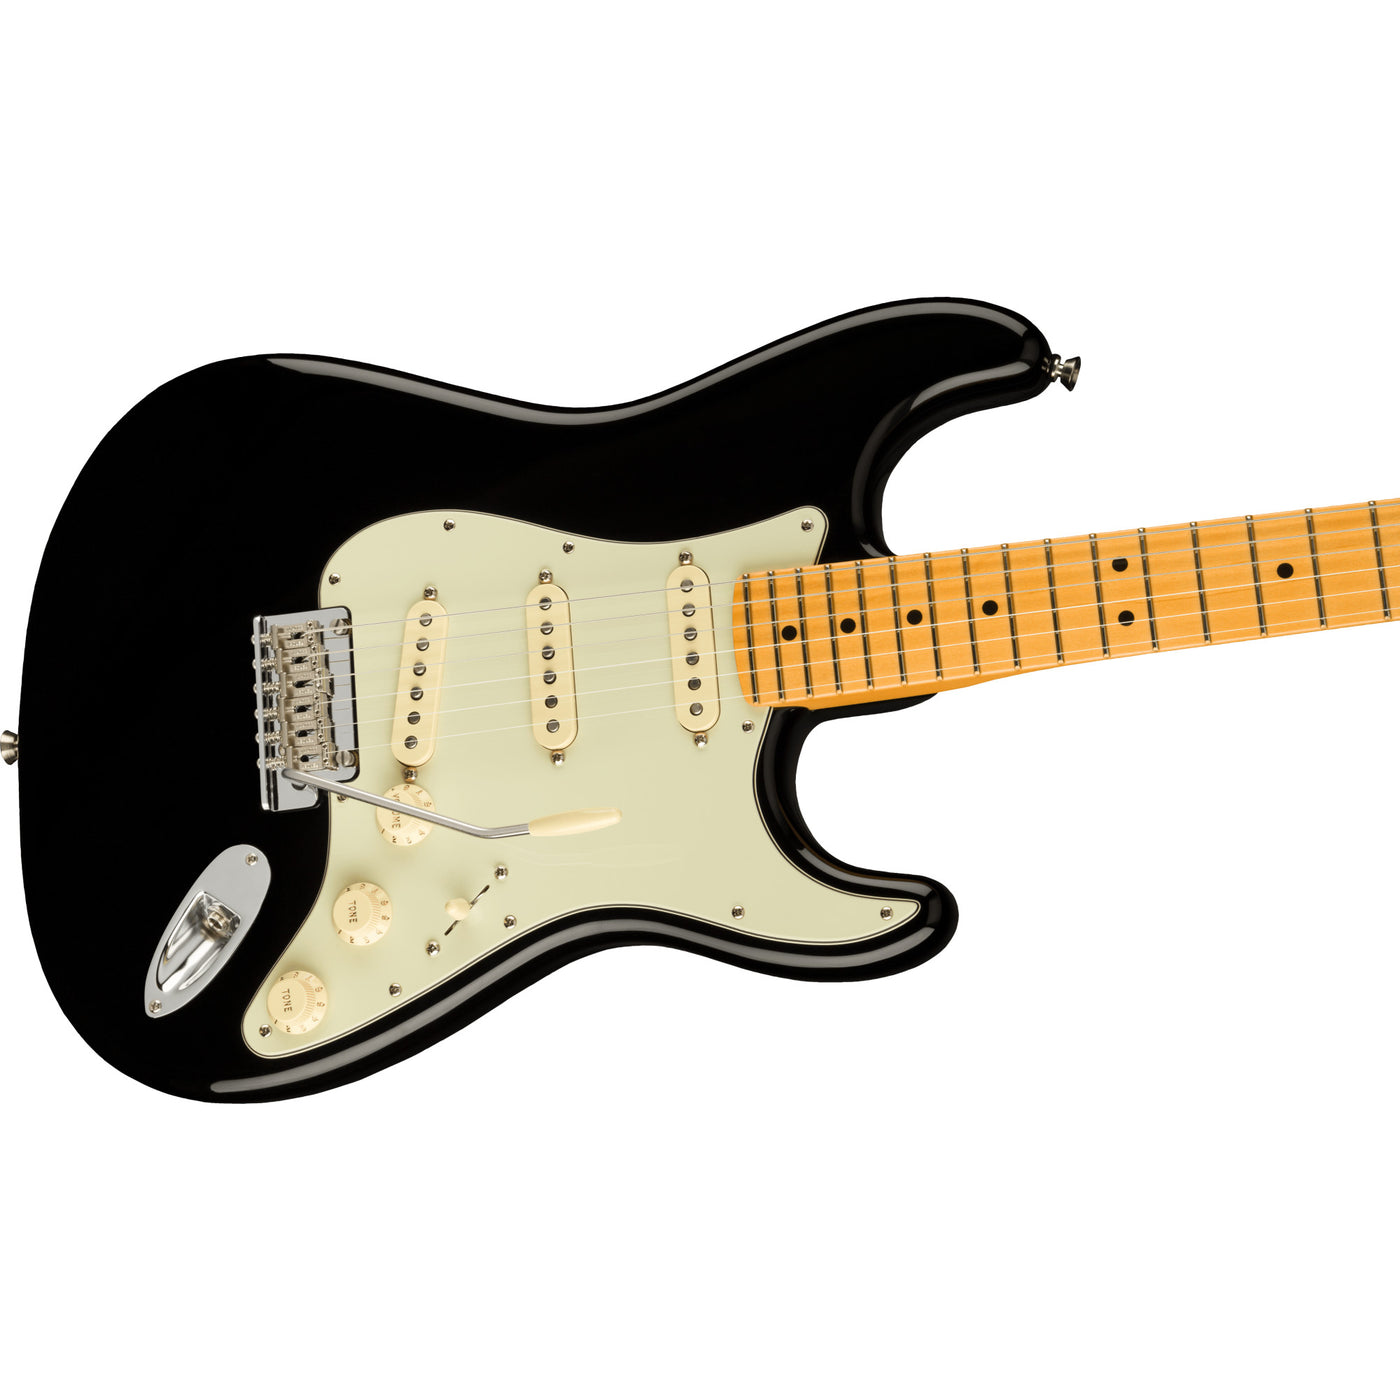 Fender American Professional ll Stratocaster Electric Guitar, Black (0113902706)